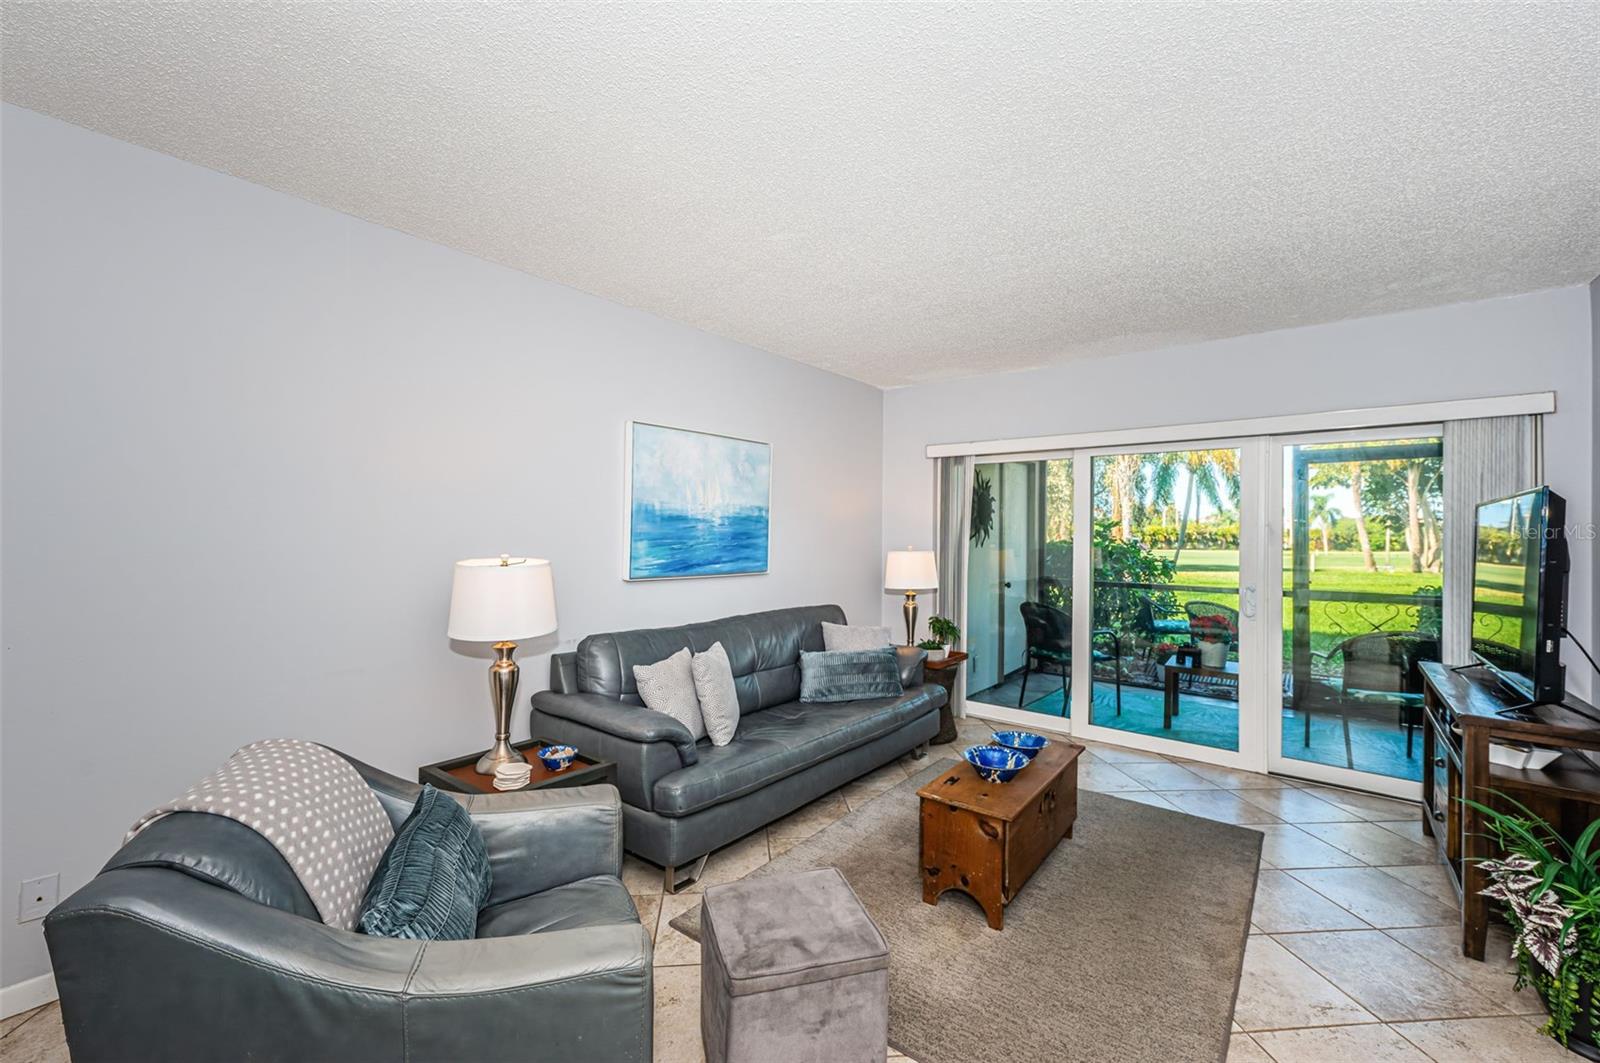 With tile throughout, this condo offers easy maintenance and a seamless flow from room to room, perfect for coastal living.